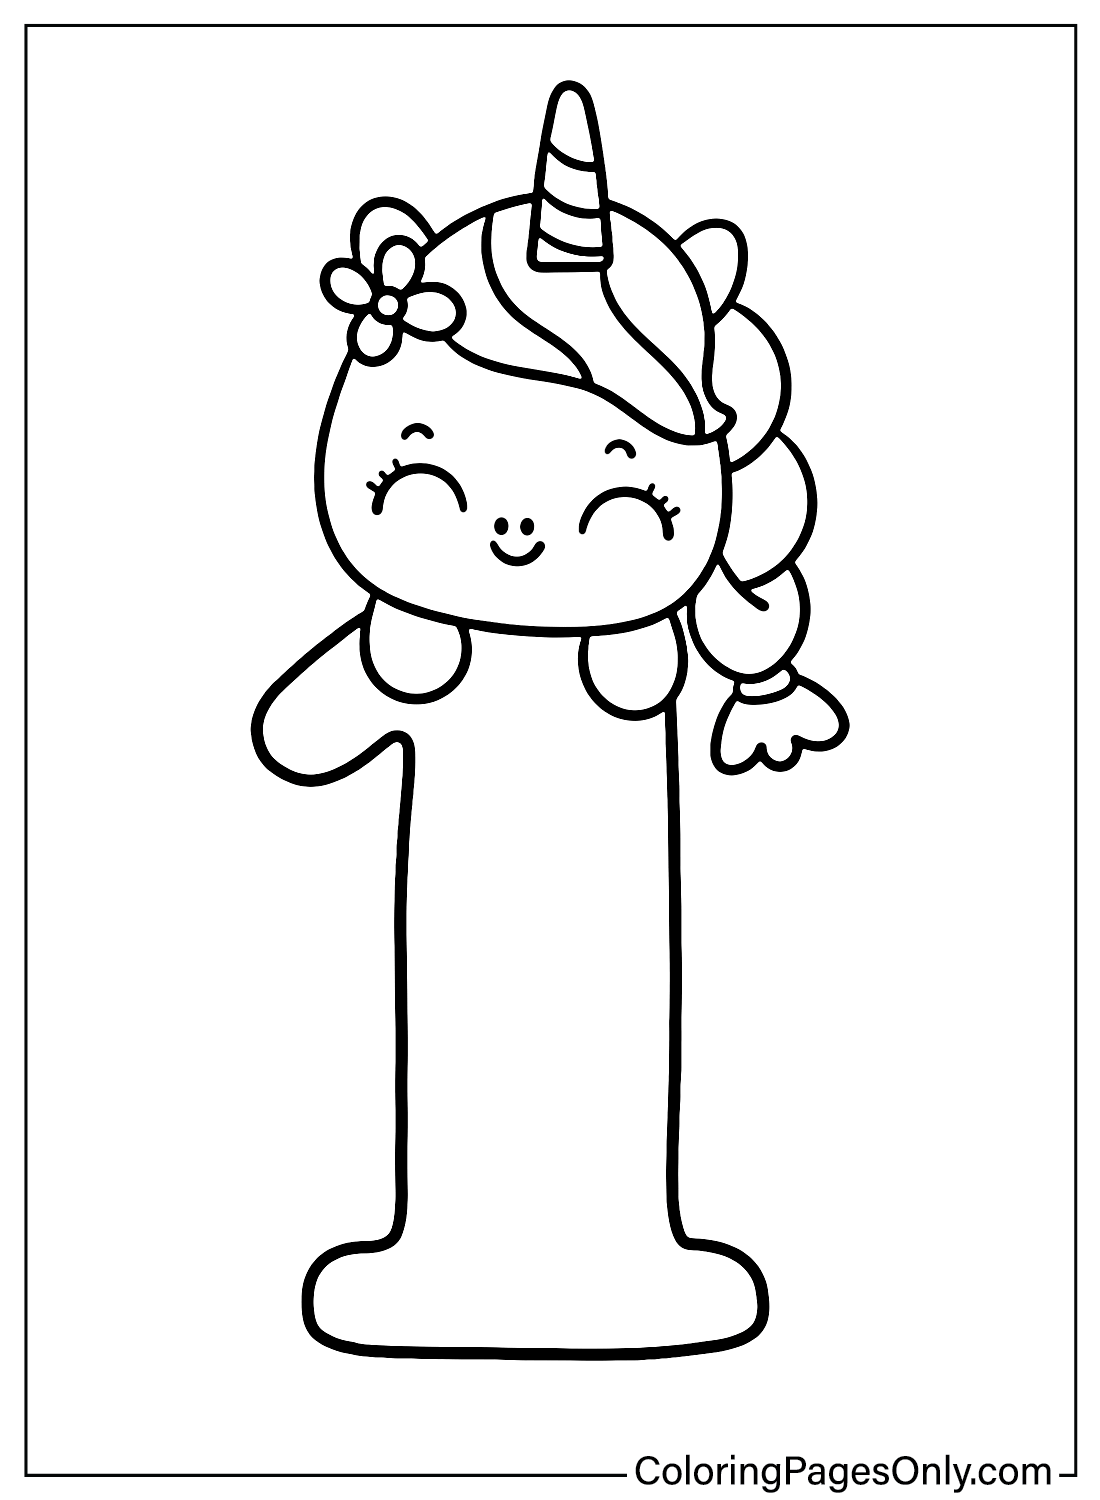 Number Free Coloring Page